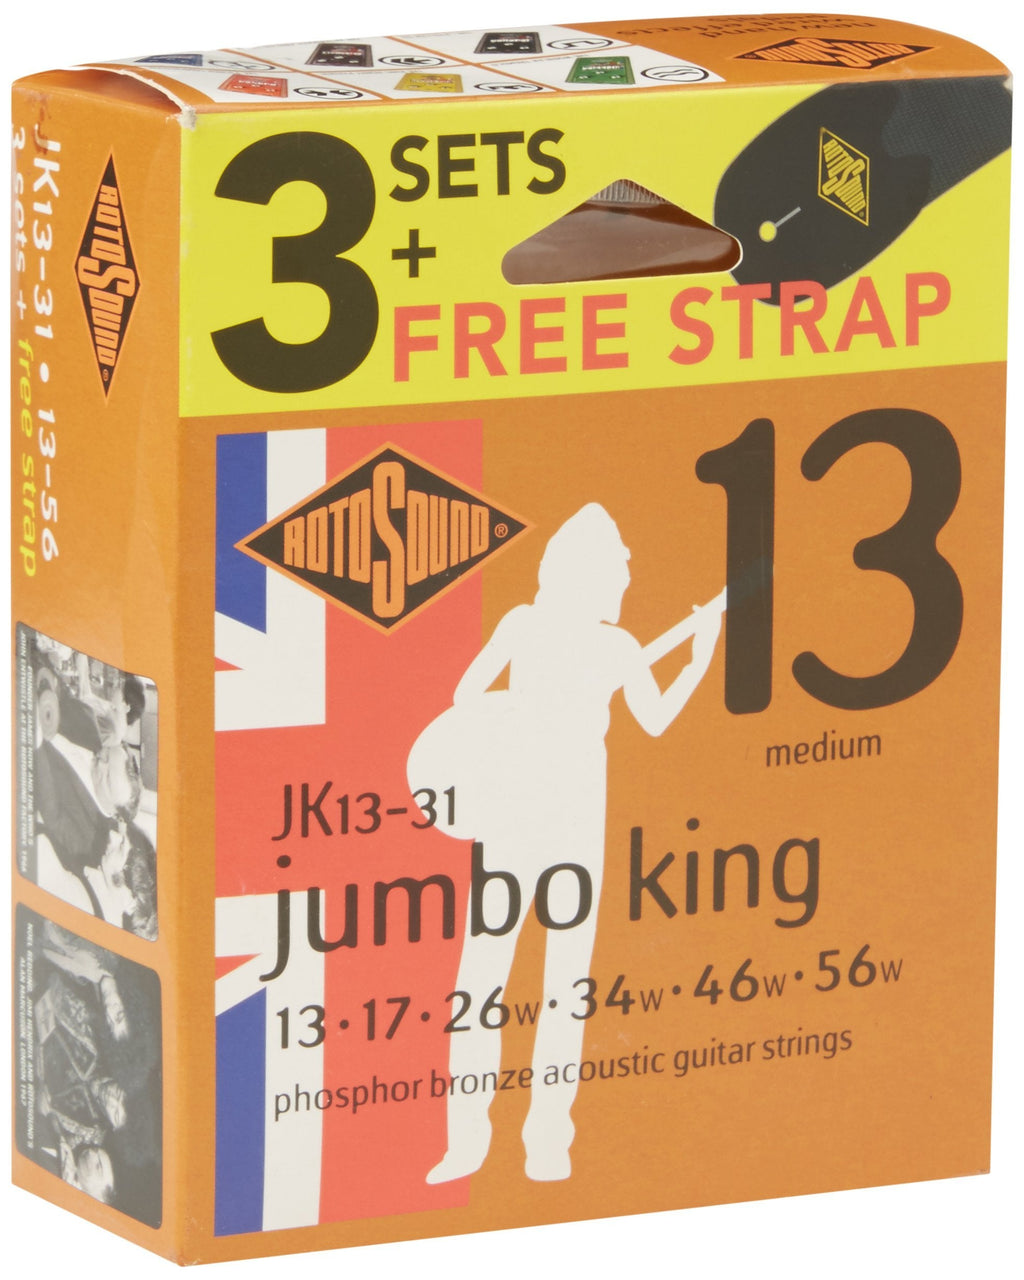 Rotosound JK13-31F Acoustic Guitar Strings with Strap (Pack of 3)